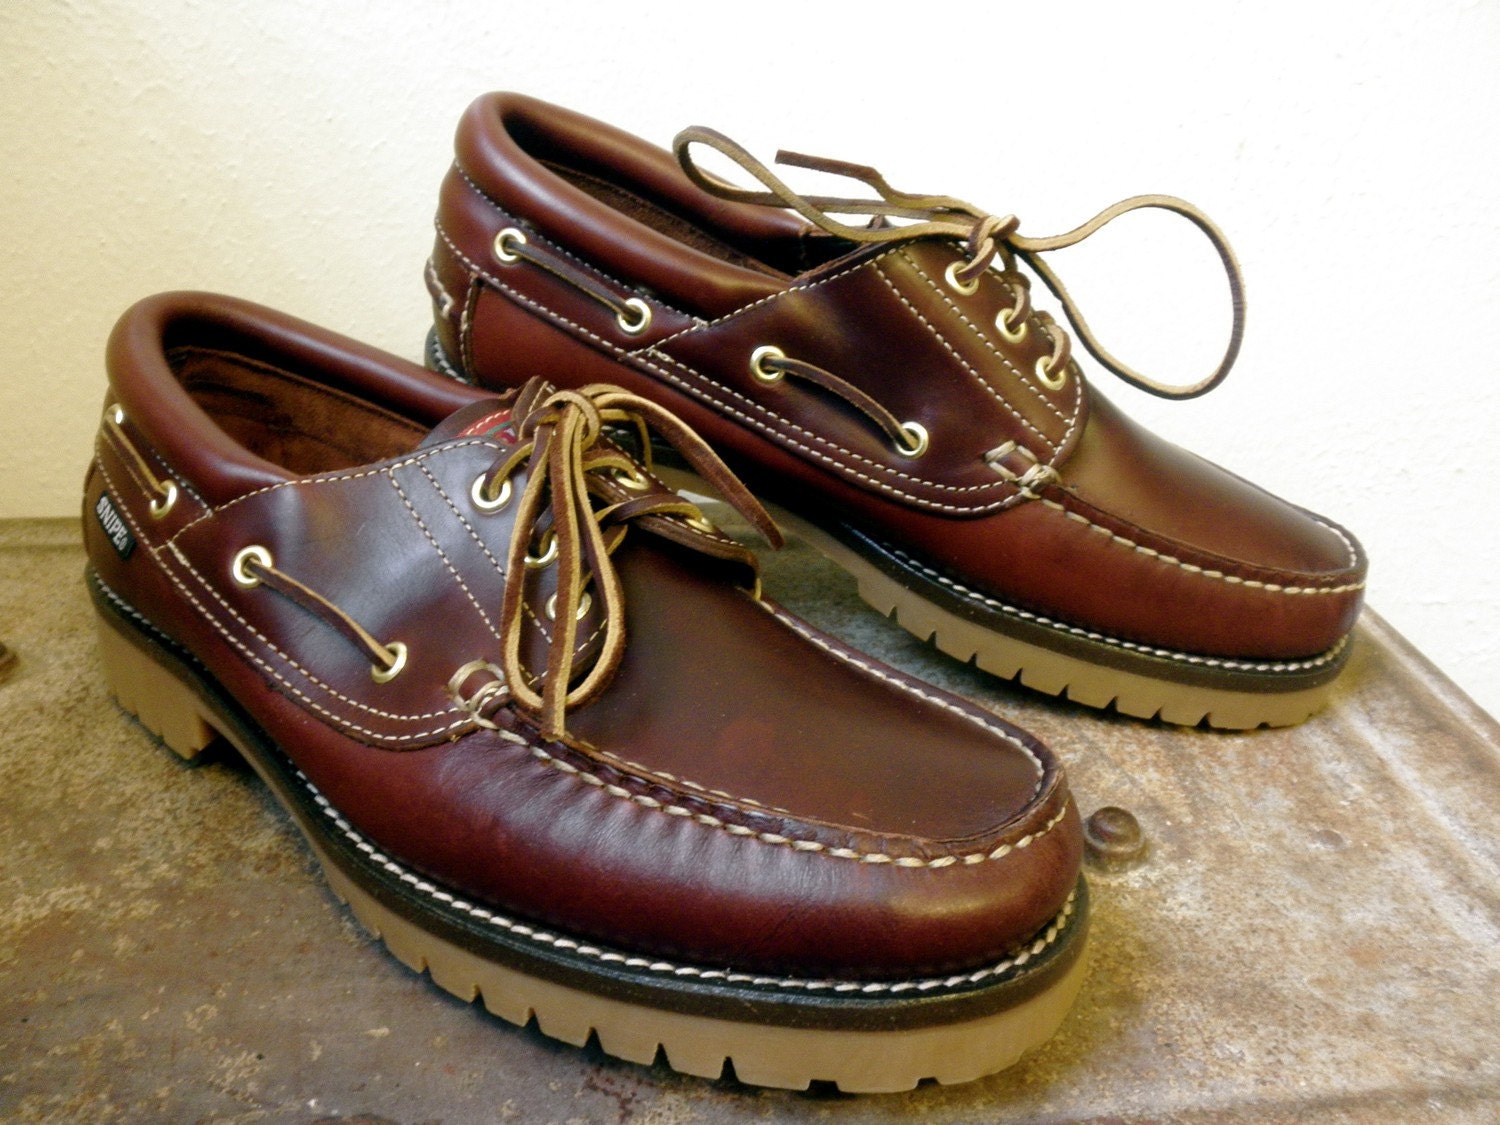 Men's High Quality Leather All Weather SNIPE Boat Shoes